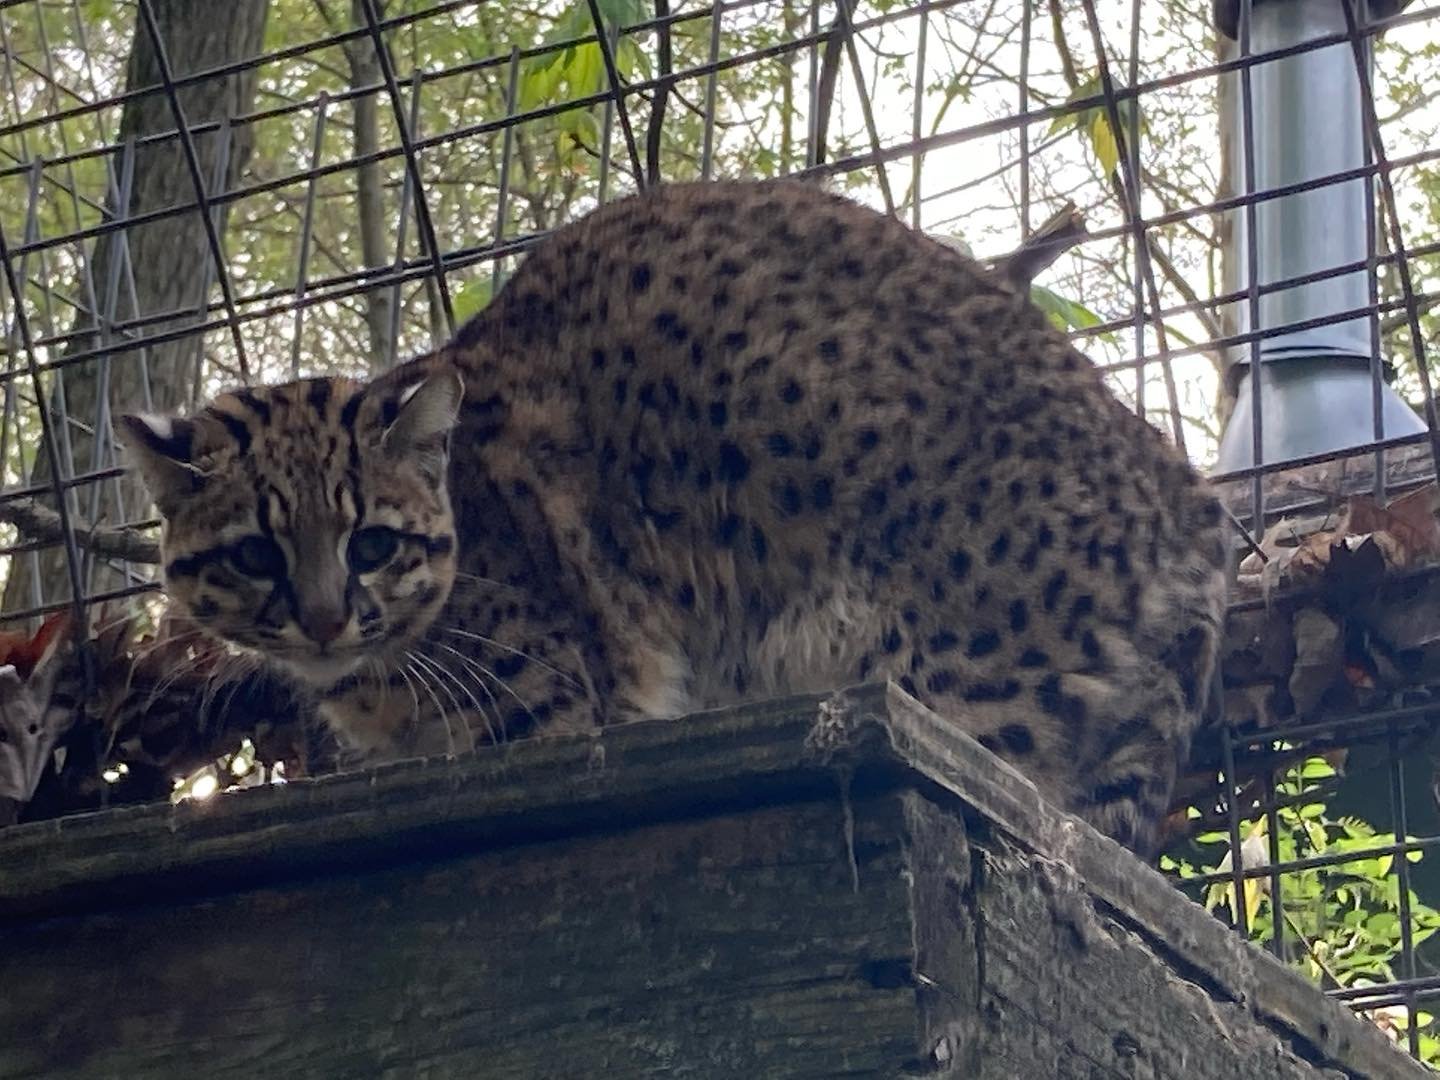 Sarabi likes to supervise her keepers to make sure they clean her enclosure correctly. #efrc #geofferyscat #thursday #cleaning